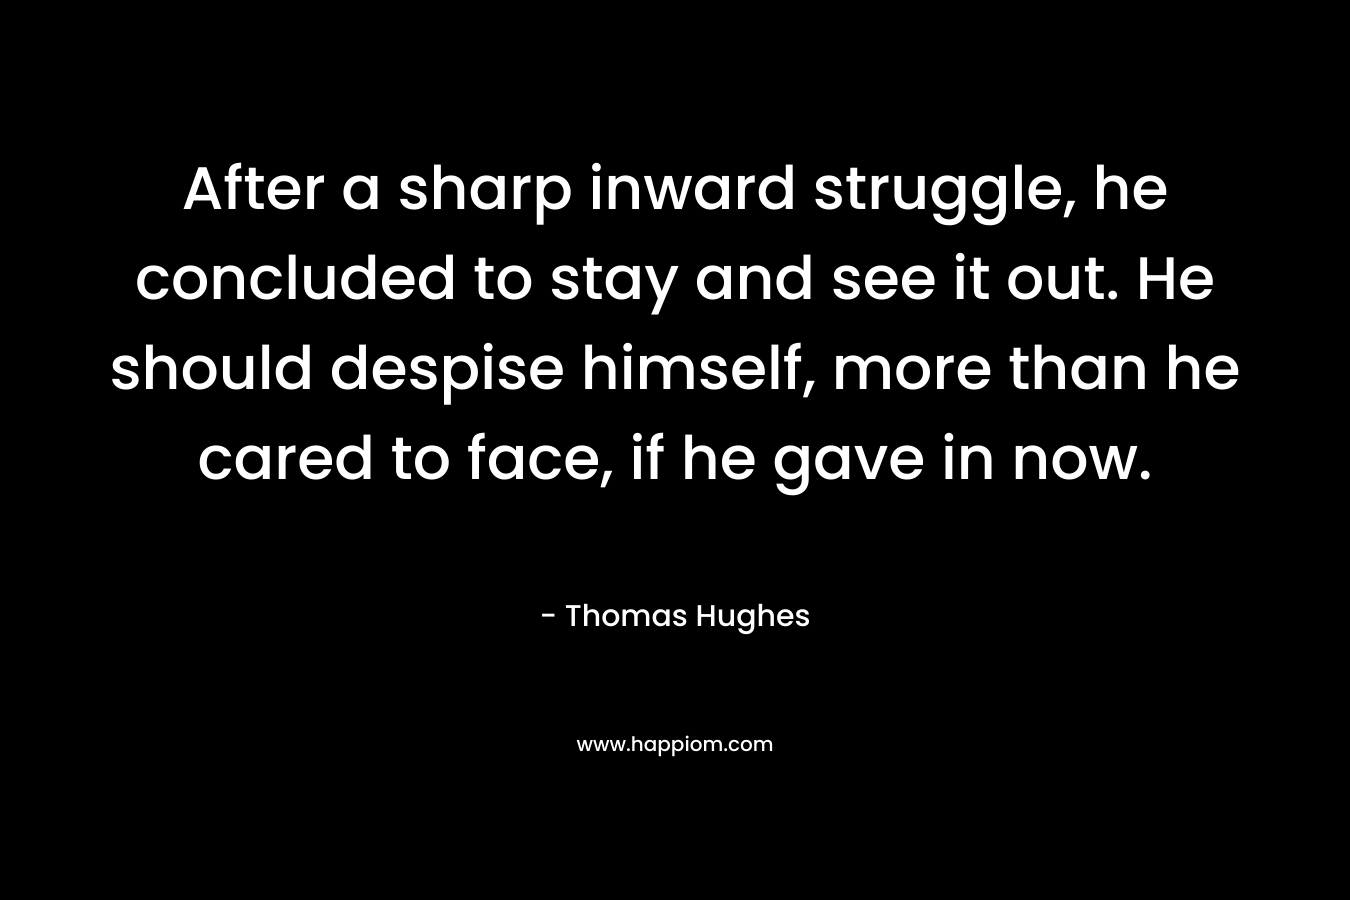 After a sharp inward struggle, he concluded to stay and see it out. He should despise himself, more than he cared to face, if he gave in now. – Thomas Hughes